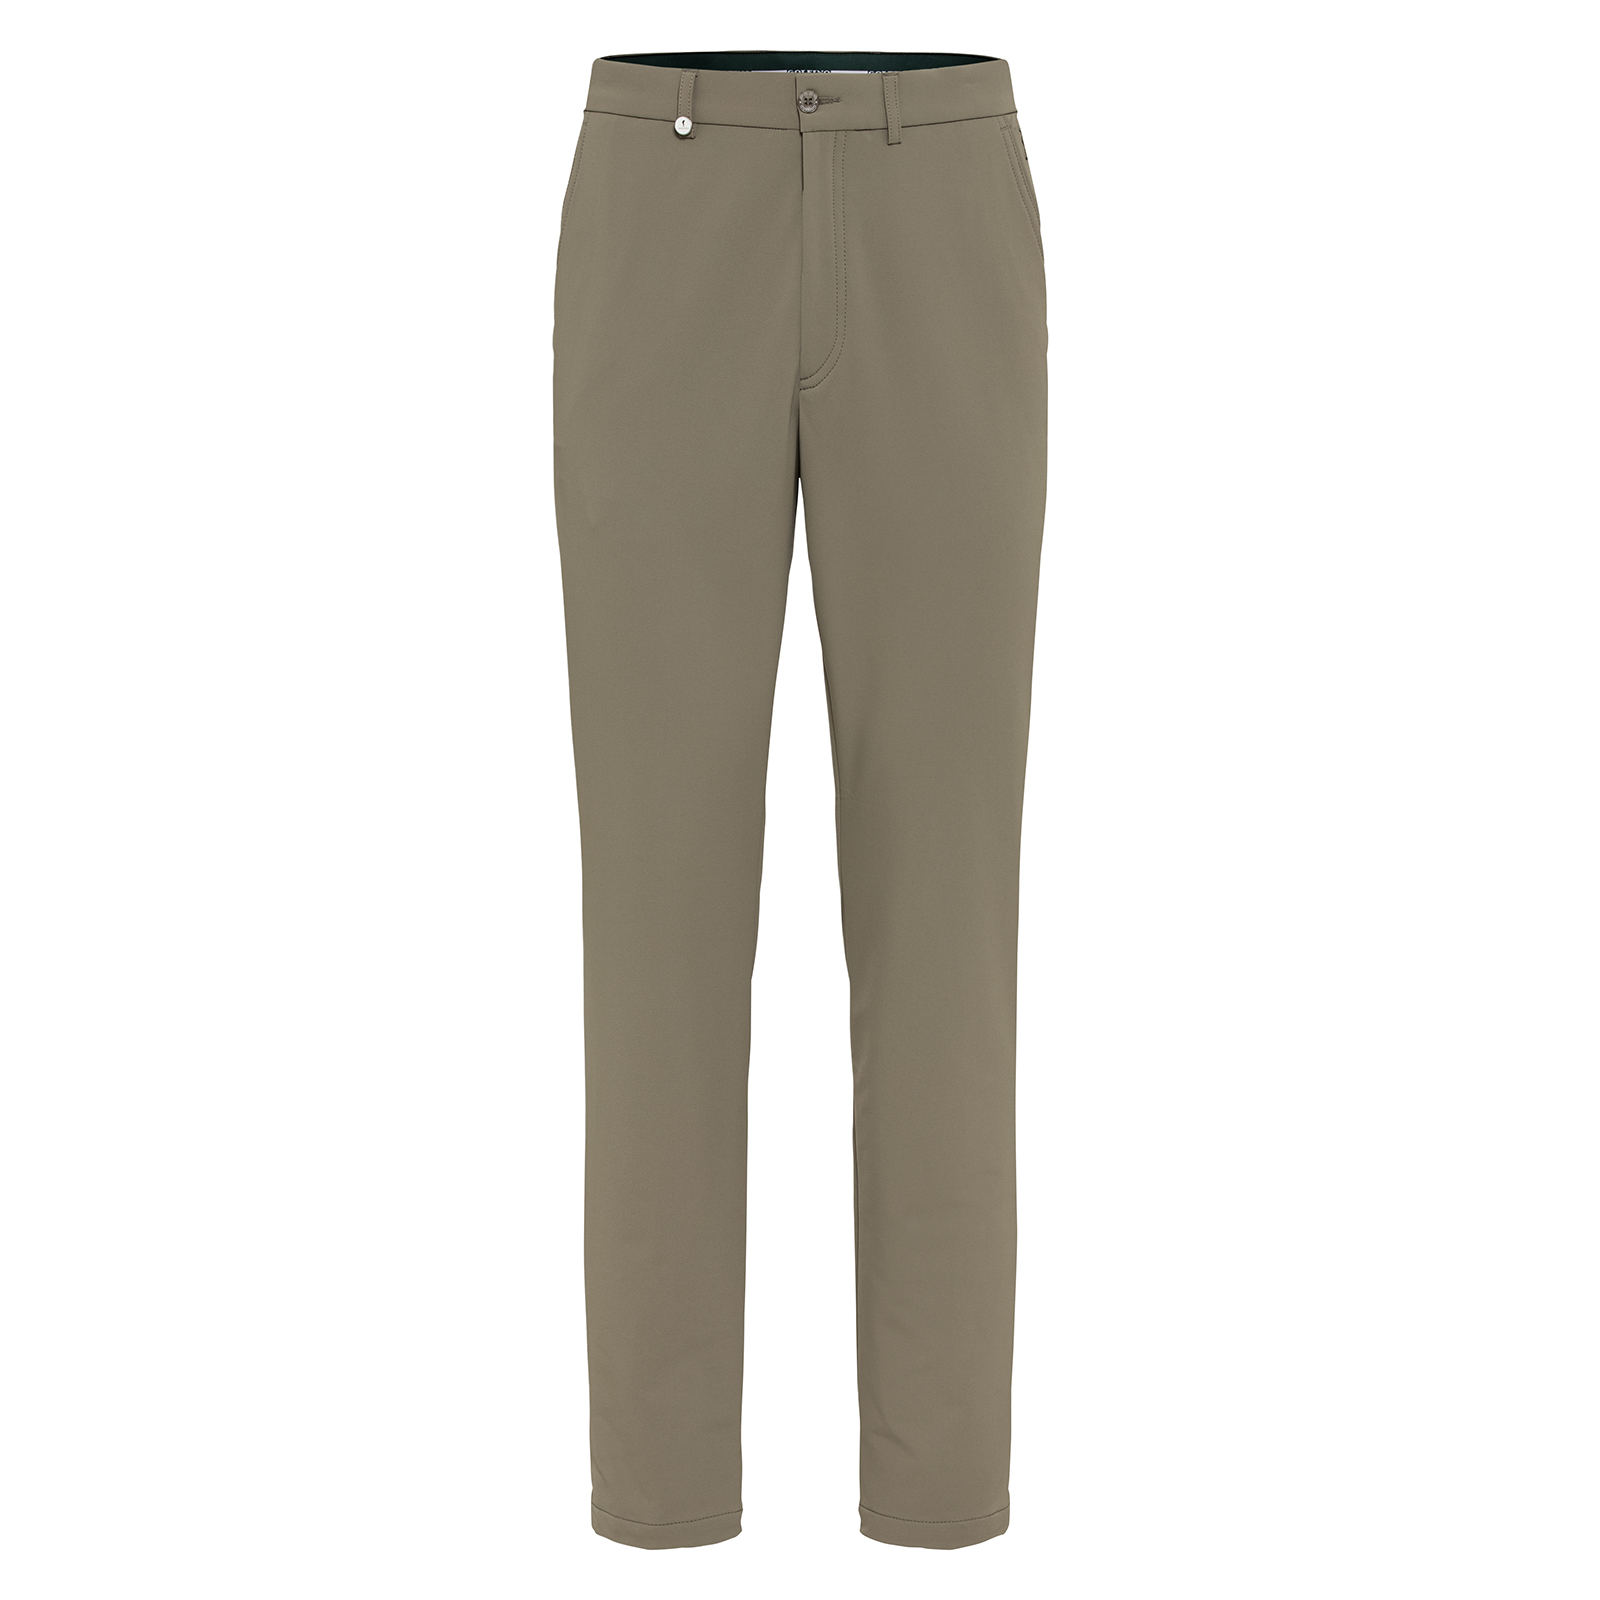 Men's thermal golf trousers with 4-way stretch function